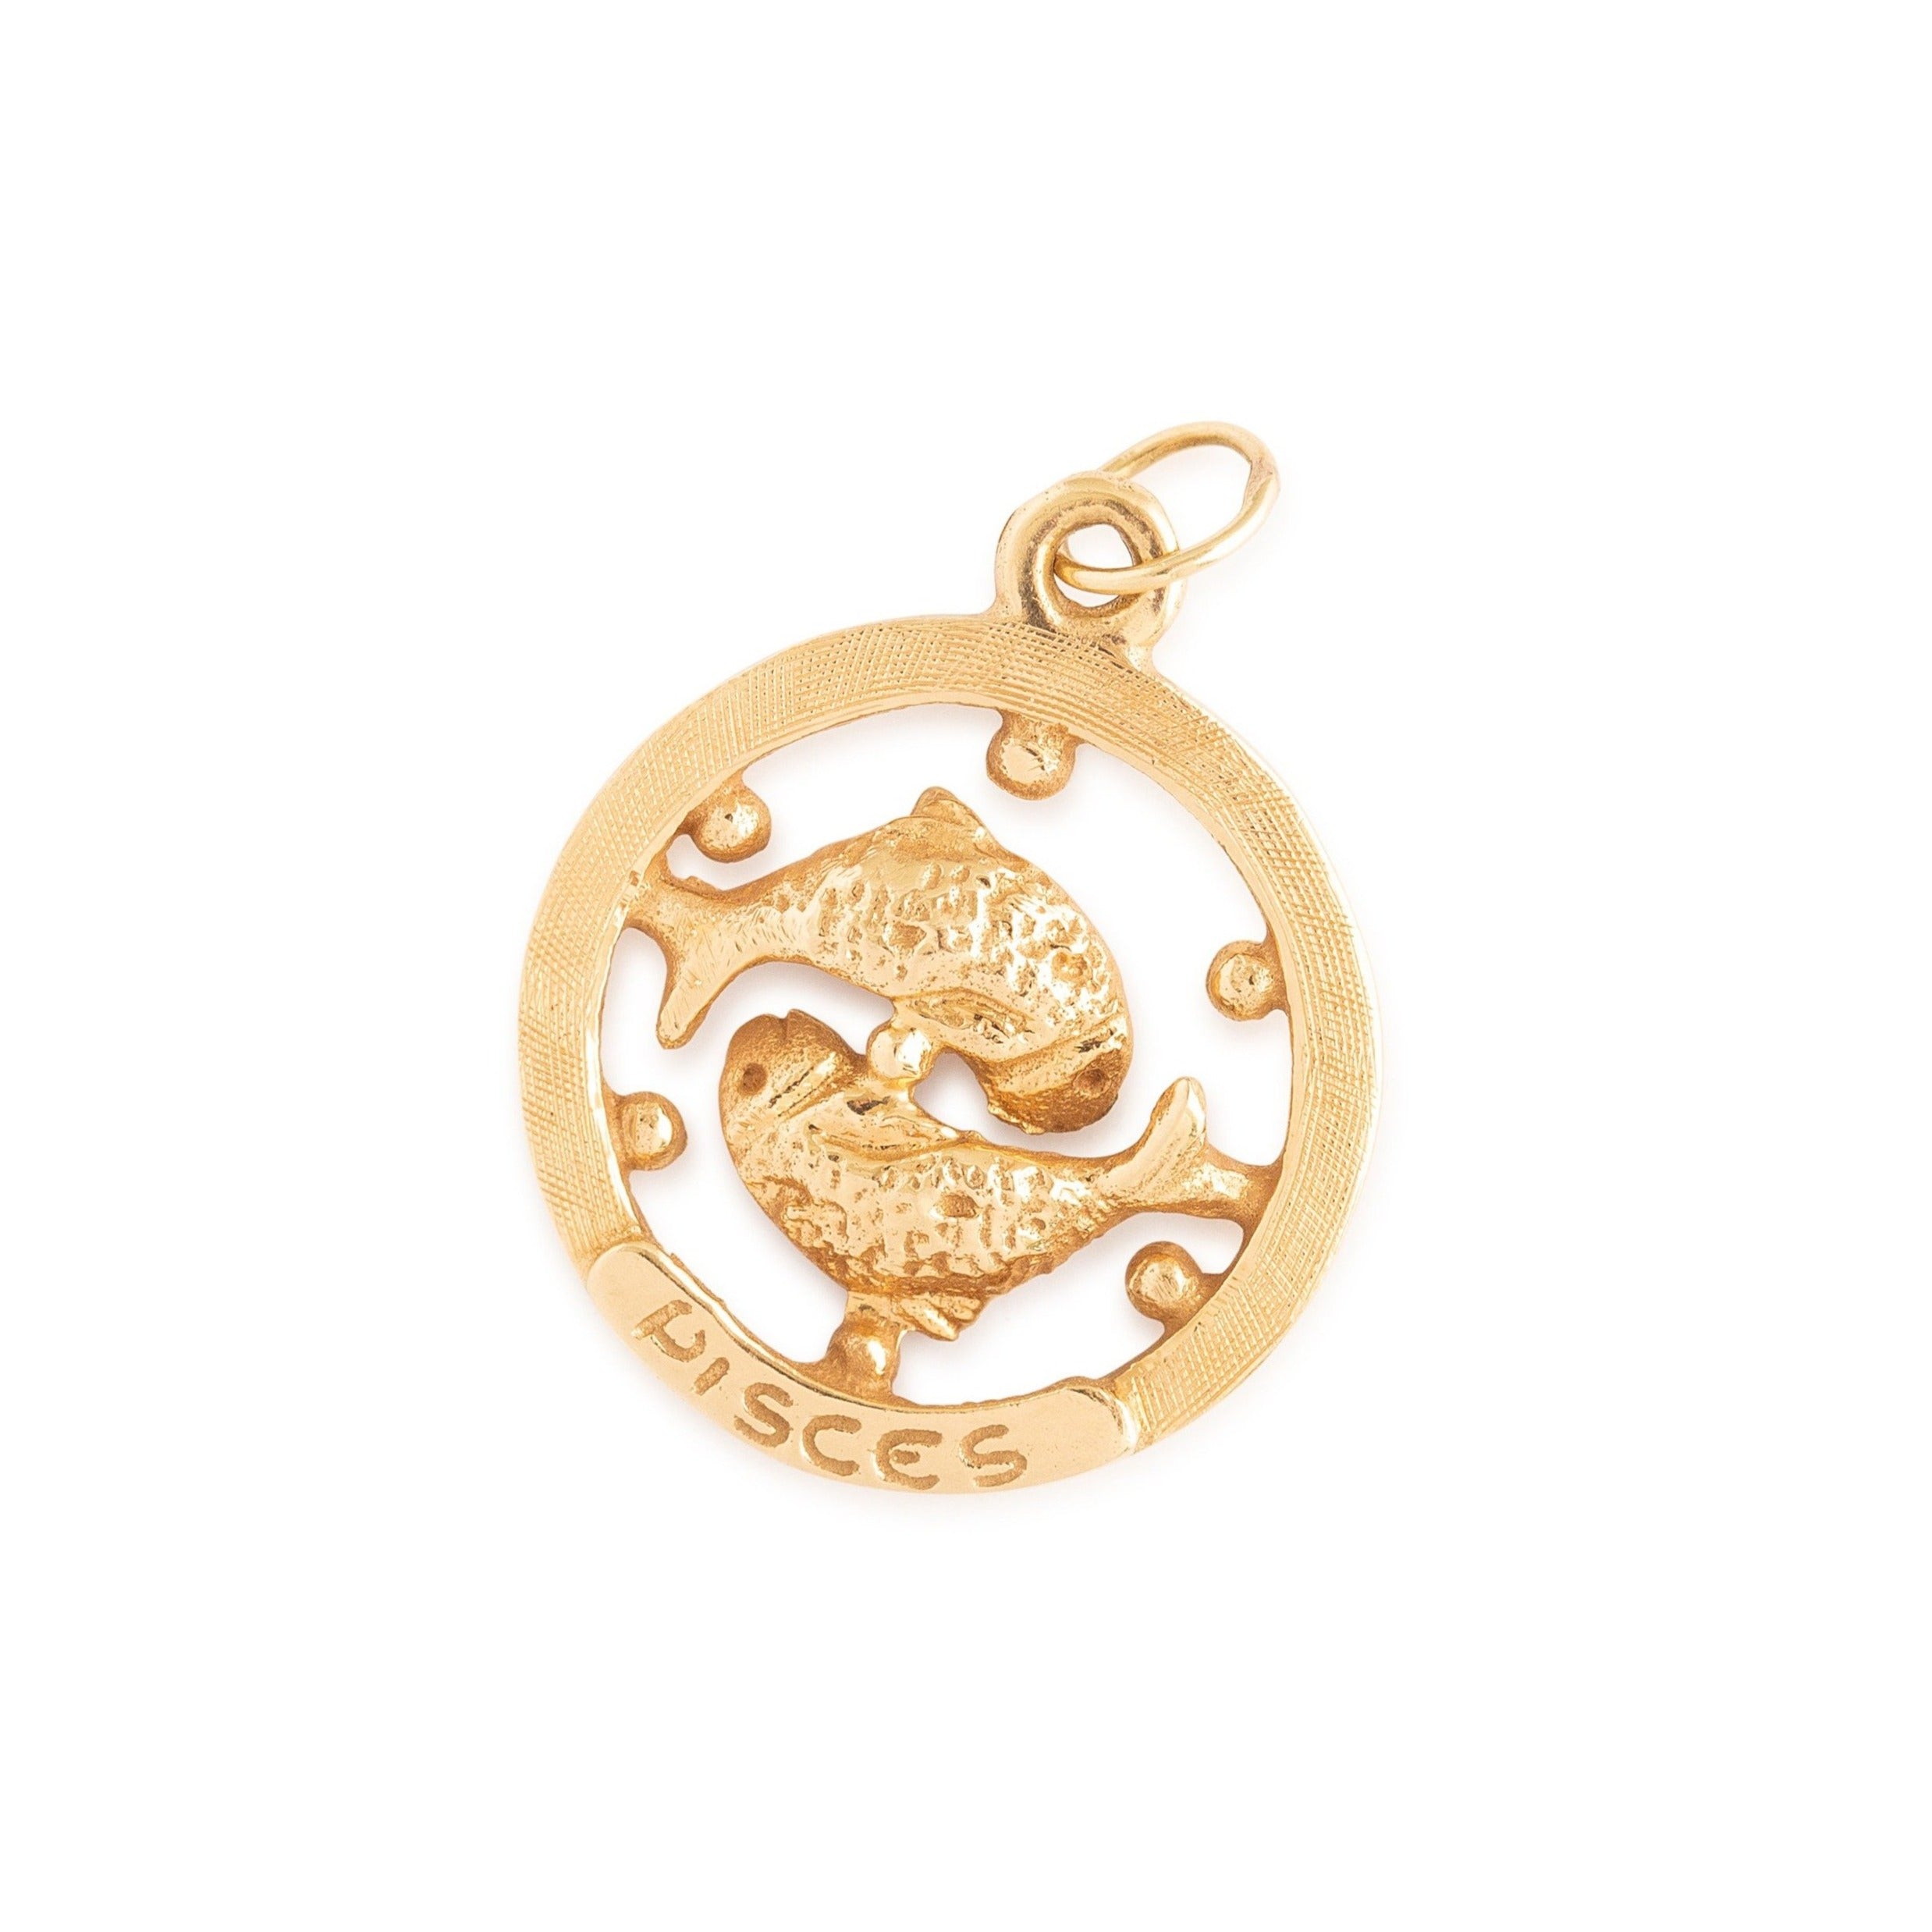 Buy 14K Gold Pisces Pendant, Pisces Charm, Pisces Symbol, Astrology Gift,  Zodiac Gift, Astrology Jewelry, Layering Pendant, Unisex Gift A3571 Online  in India - Etsy